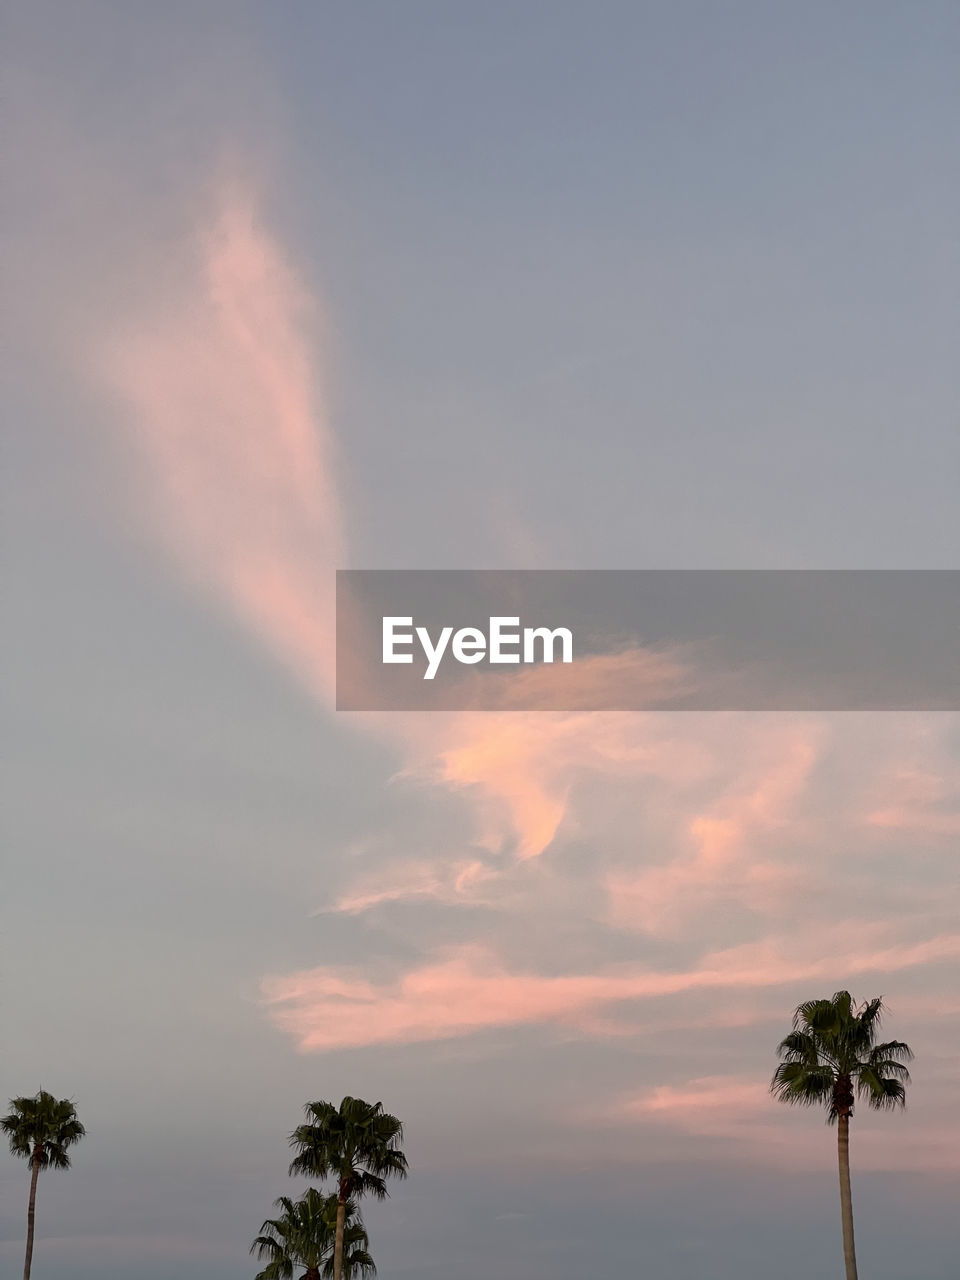 sky, palm tree, tree, tropical climate, cloud, beauty in nature, plant, nature, sunset, scenics - nature, tranquility, no people, coconut palm tree, tranquil scene, silhouette, outdoors, environment, low angle view, idyllic, dramatic sky, dusk, land, tropical tree, horizon, travel destinations, sunlight, growth